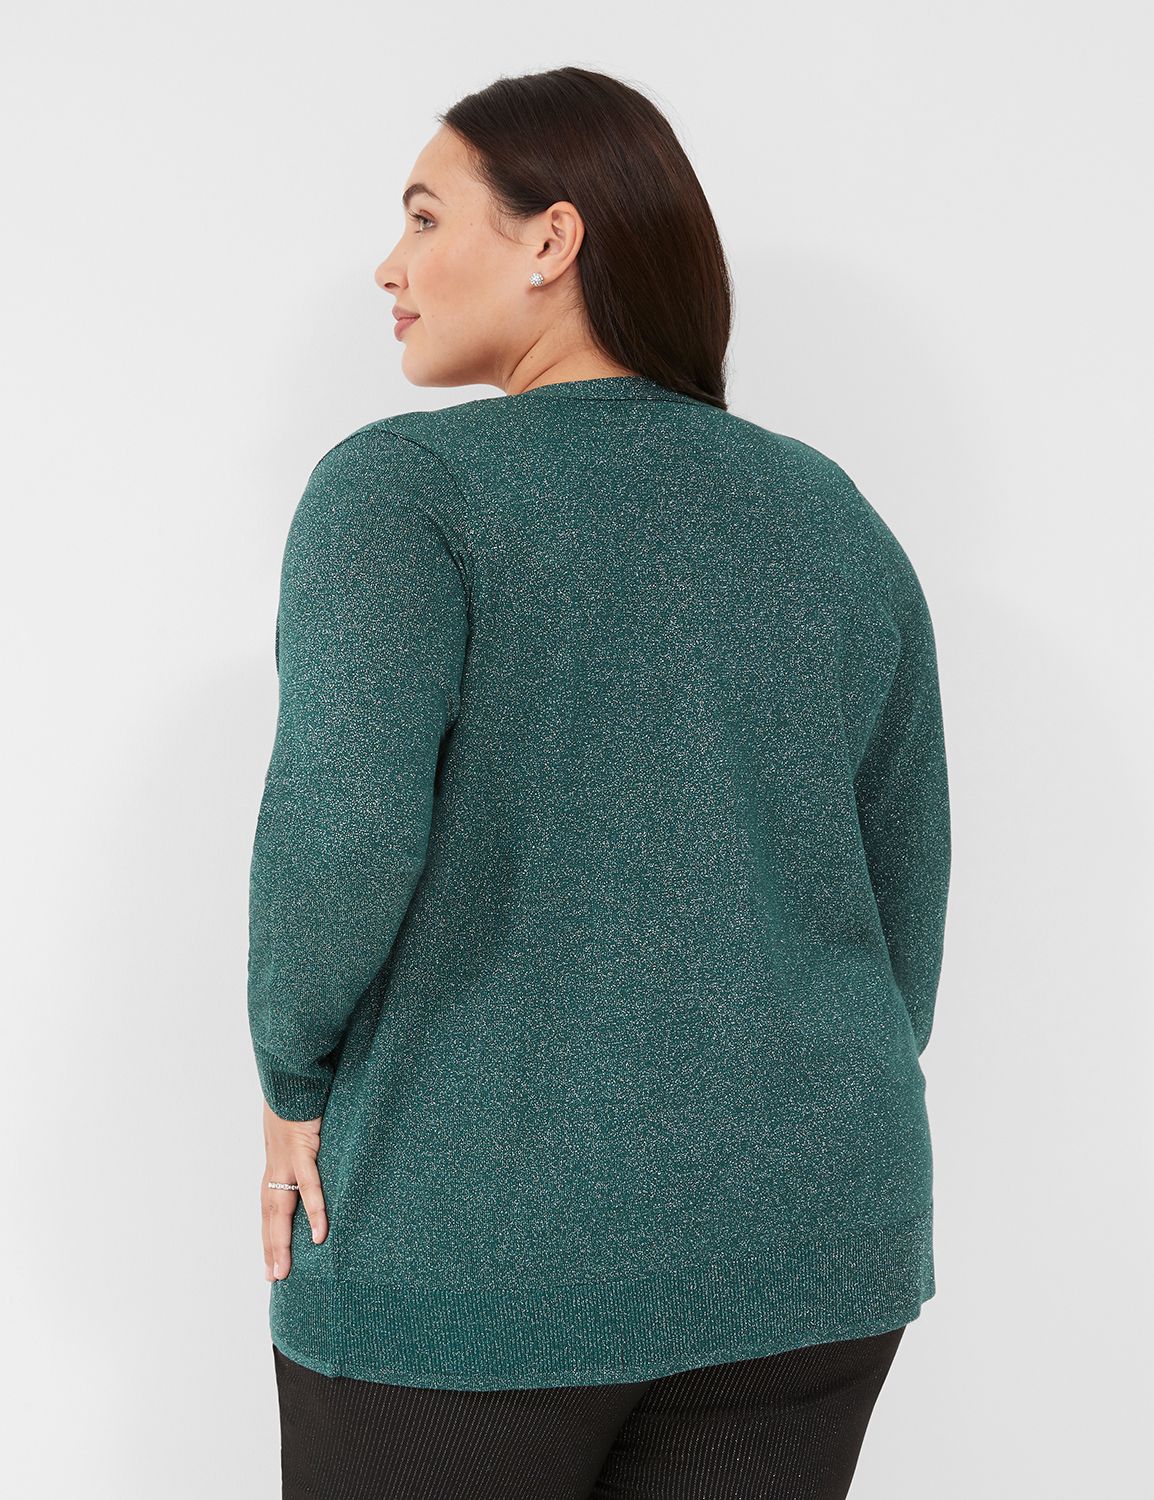 Lane Bryant - Sweaters & jeans that feel just as soft and comfy as the  lounge sets you've been *living in* are ready for guests (and furry  friends). Cardigan:  Jeans